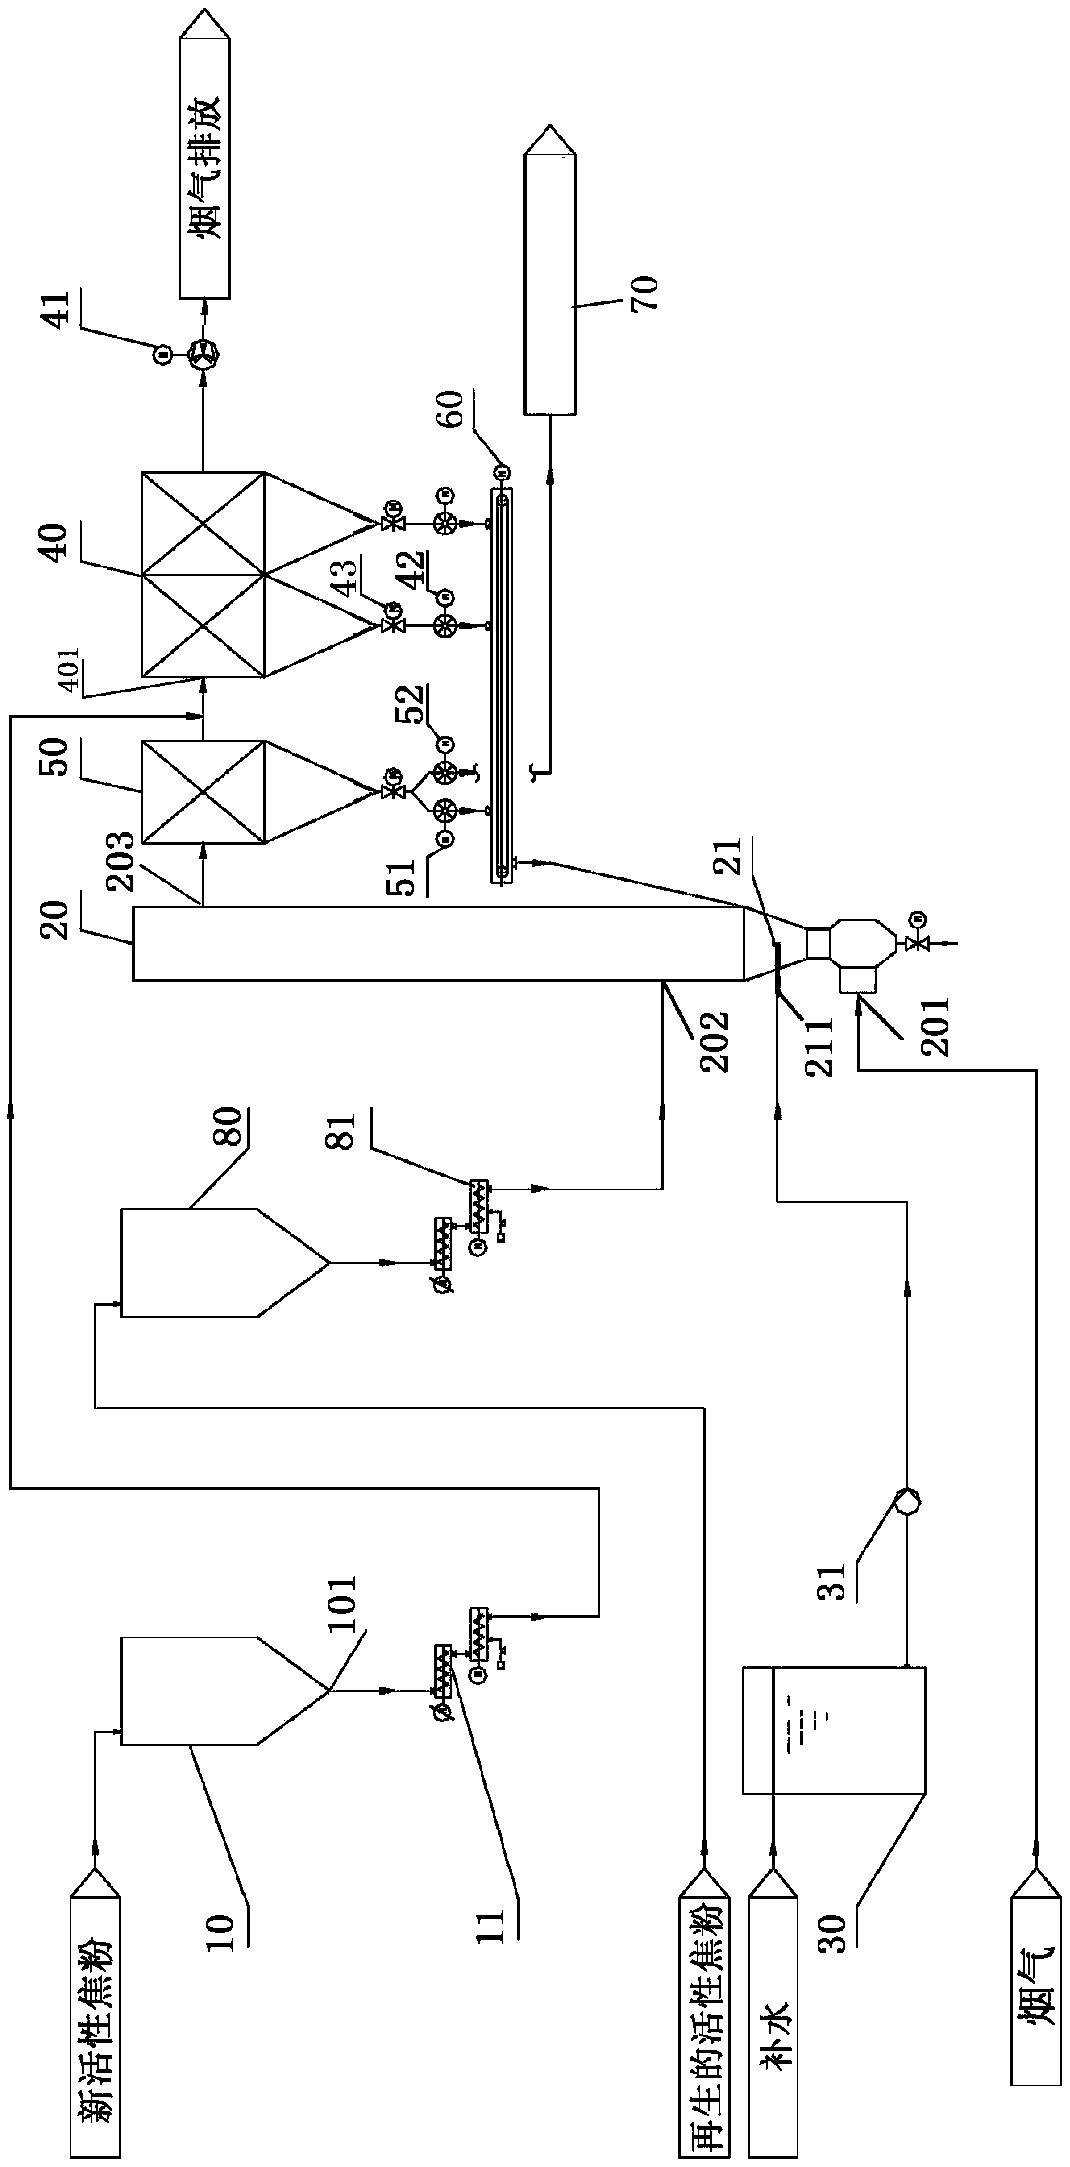 Powder activated coke adsorption desulfurization device and method for adsorbing and desulfurizing flue gas by utilizing powder activated coke adsorption desulfurization device